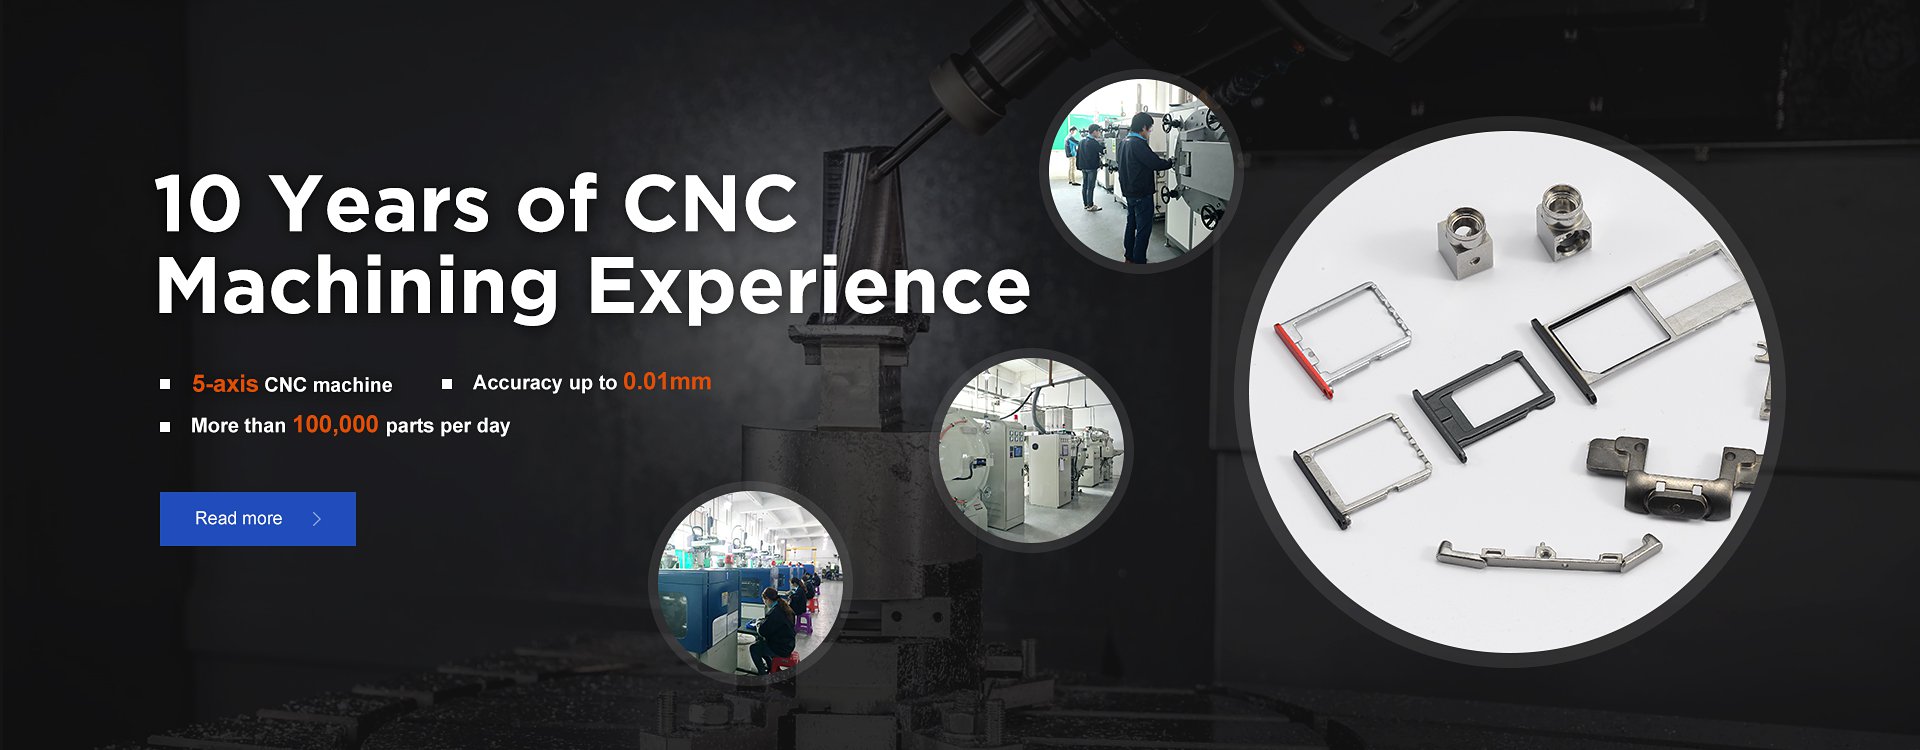 10 Years of CNC Machining Experience